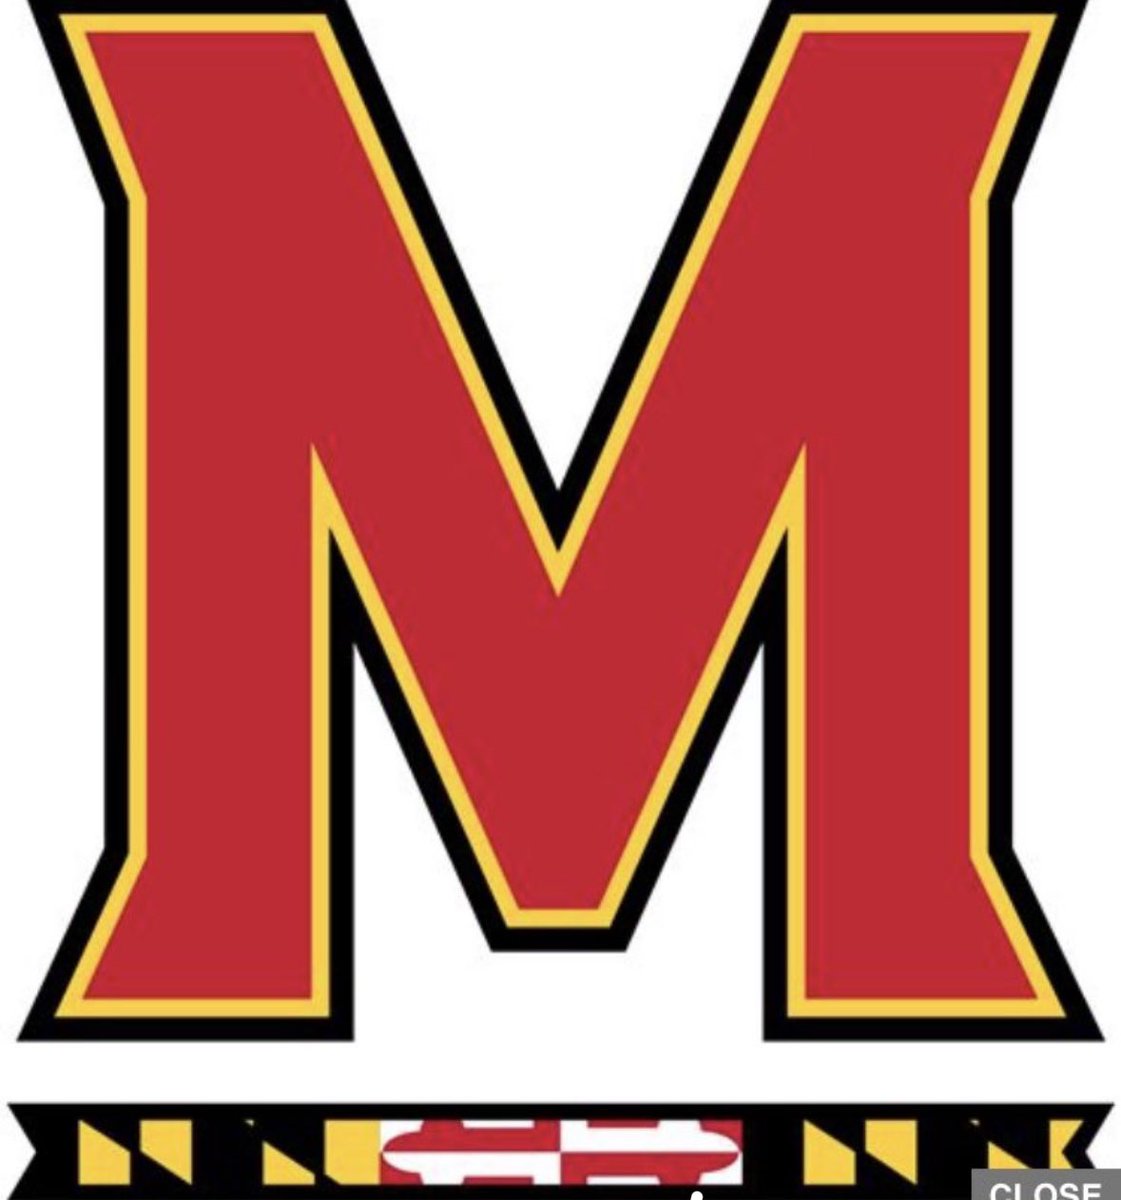 Change of plans I will be at UMD June 22 !!
#goterps🐢🐢